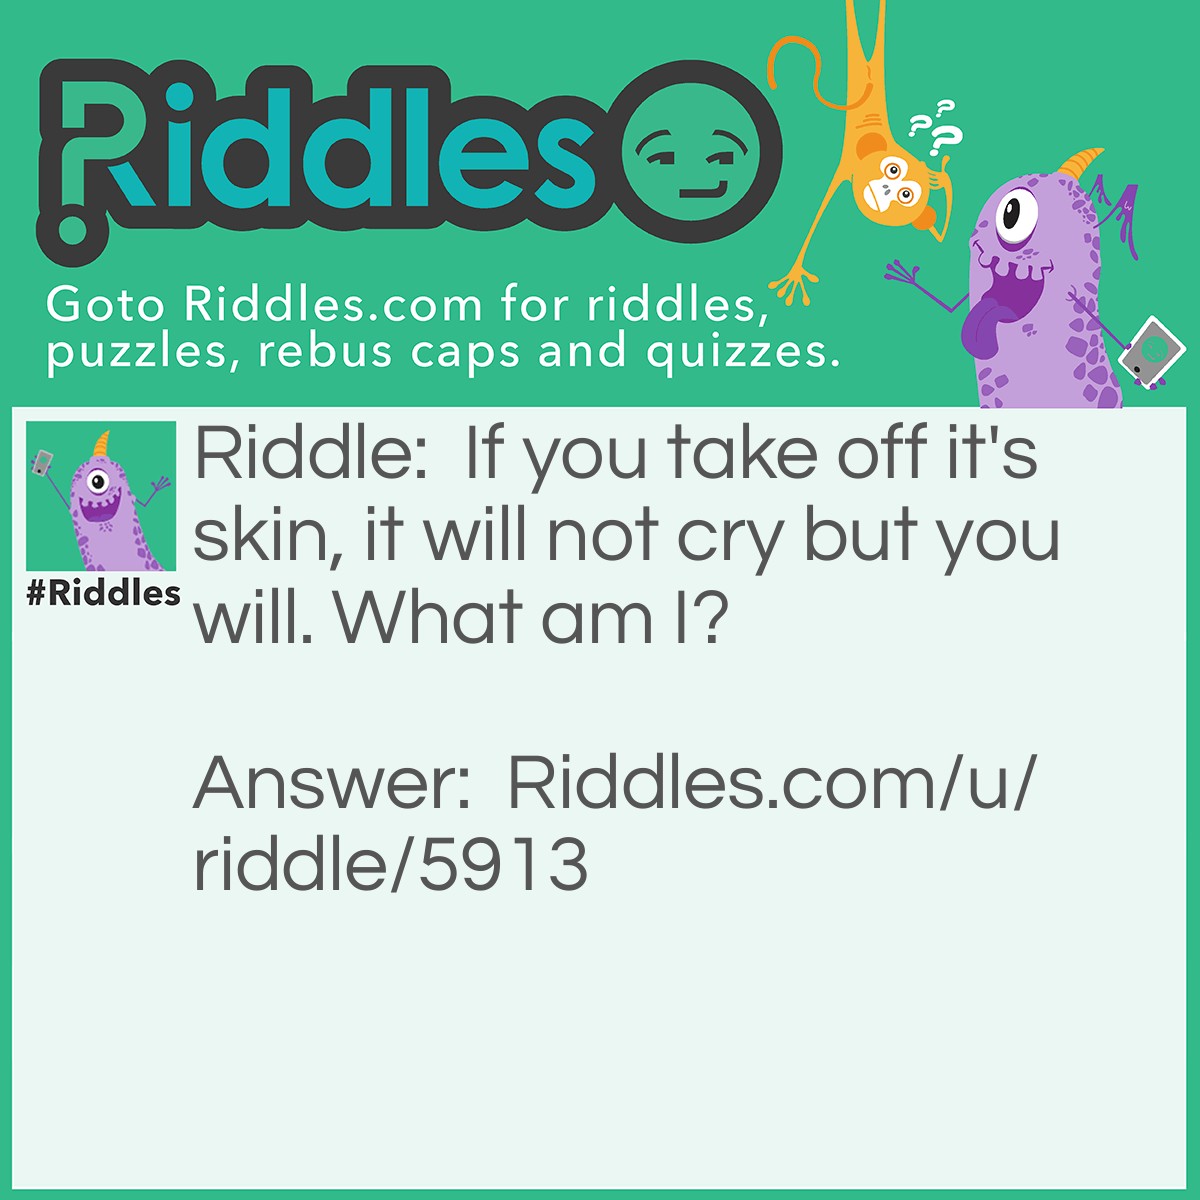 Riddle: If you take off it's skin, it will not cry but you will. What am I? Answer: An Onion.